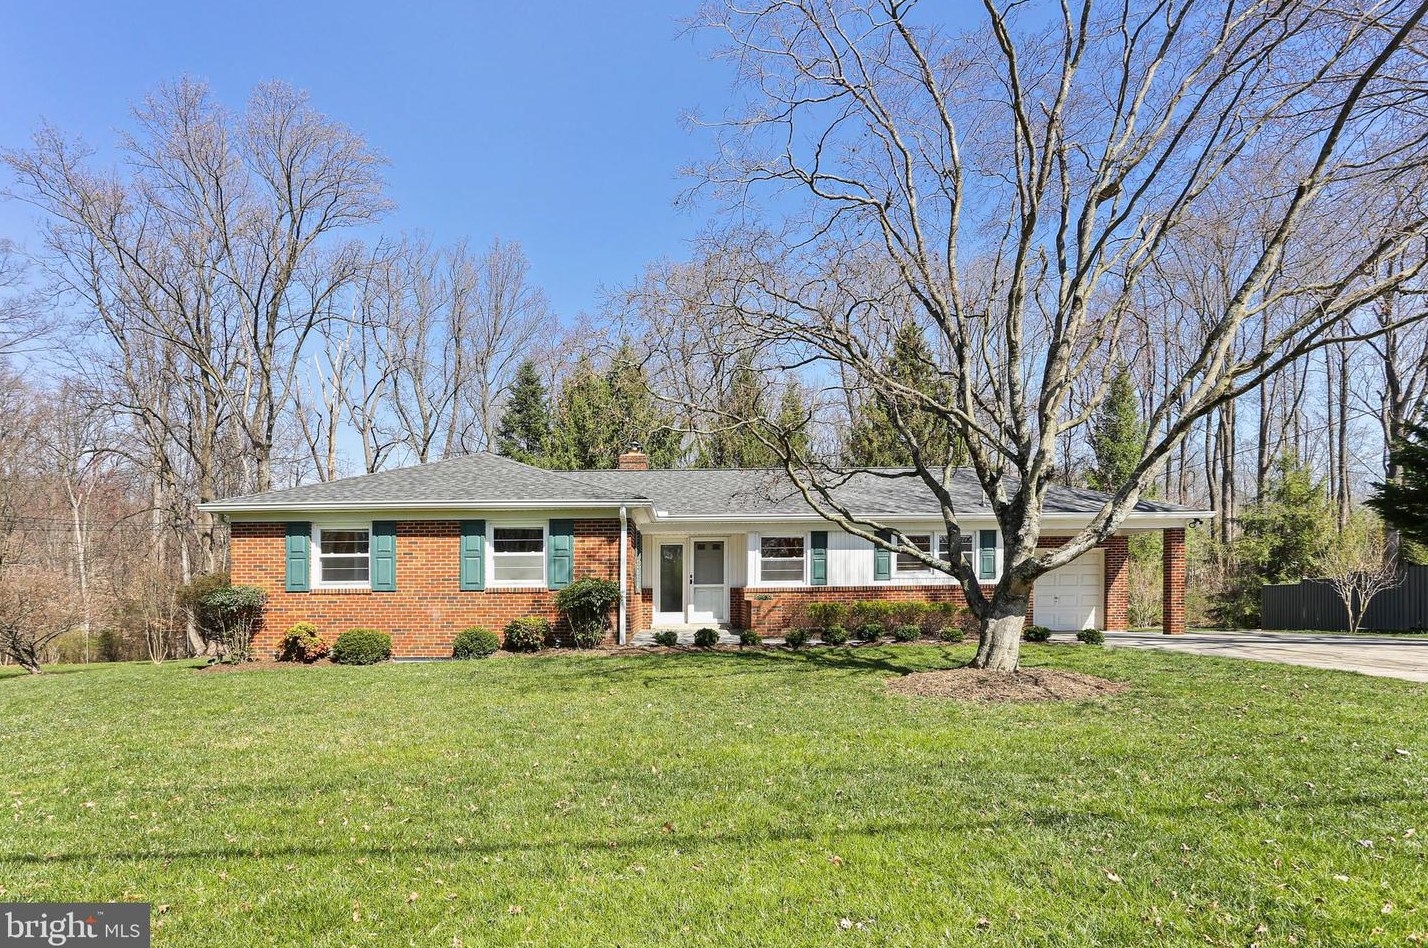 17805 Dominion Dr, Sandy Spring, MD 20860